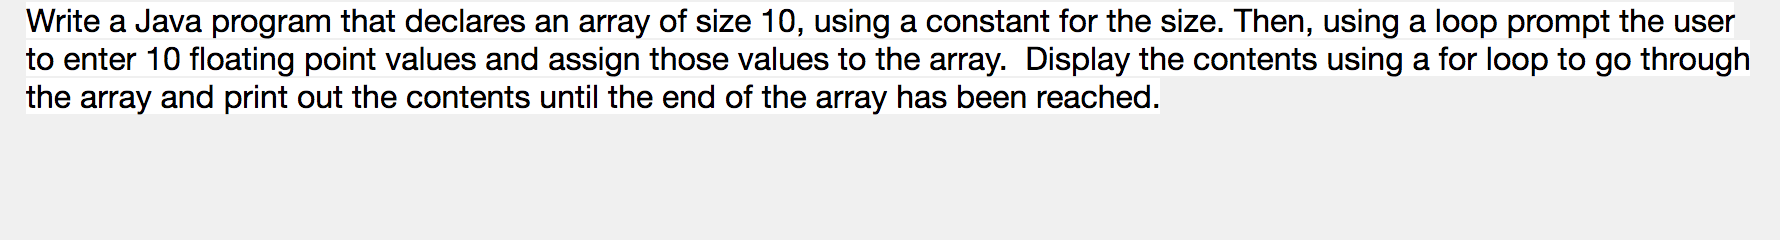 Write a Java program that declares an array of size 10, using a constant for the size. Then, using a loop prompt the user
to enter 10 floating point values and assign those values to the array. Display the contents using a for loop to go through
the array and print out the contents until the end of the array has been reached.
